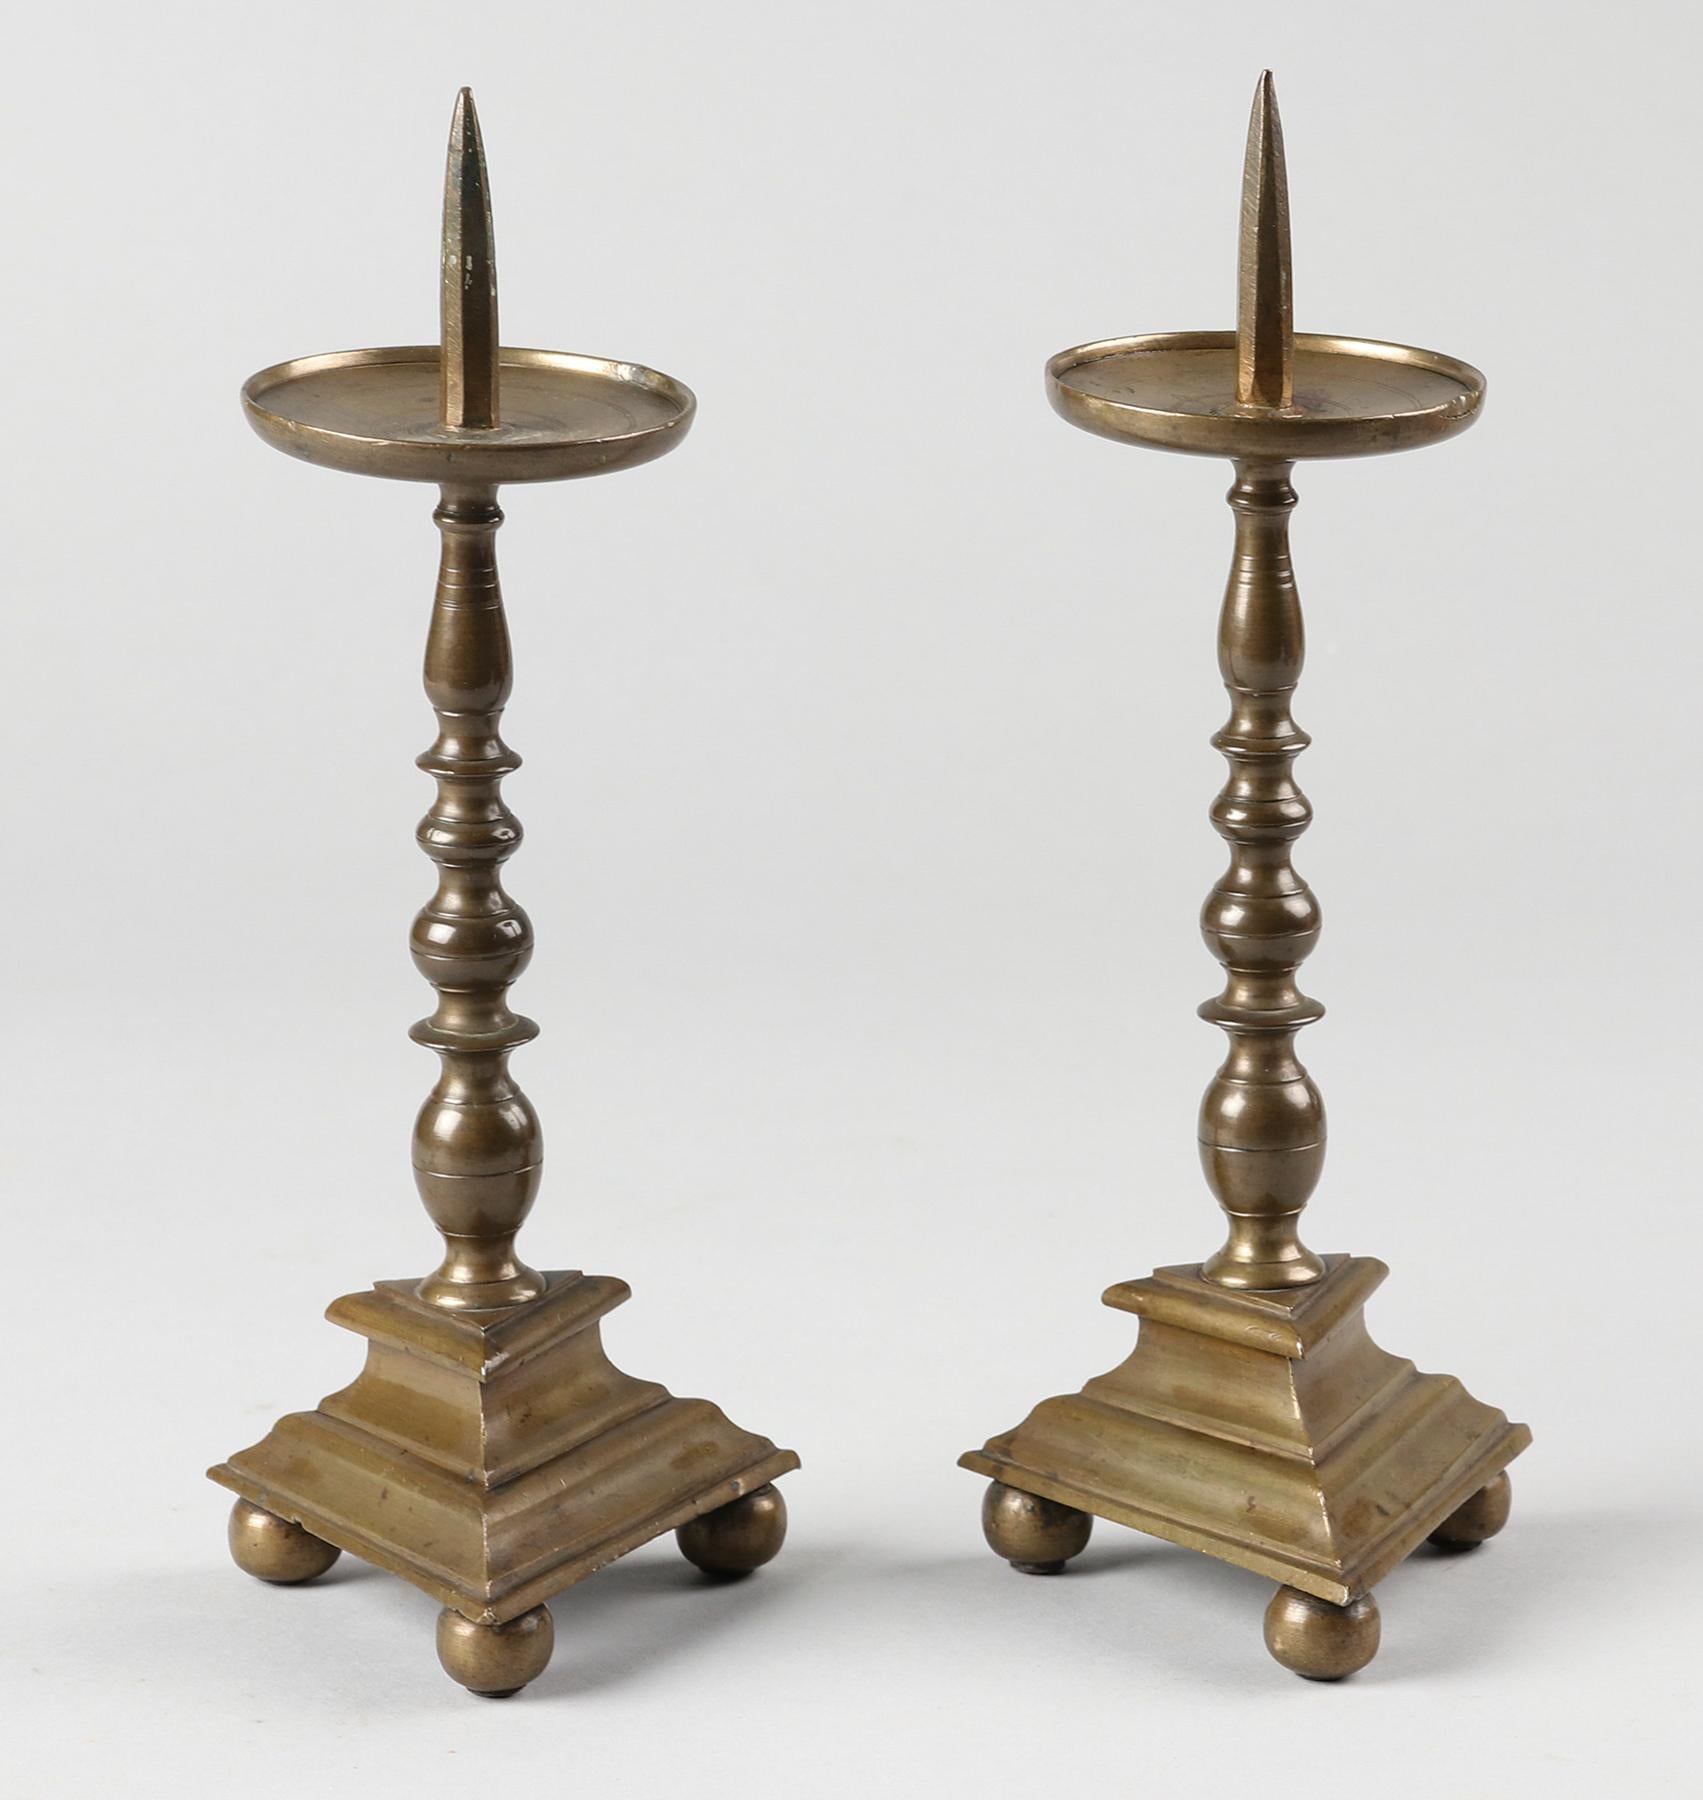 Nice pair of copper candlesticks. These are so-called pen candlesticks, so called because of the protruding point at the top. The candlesticks have a triangular base and a beautiful baluster-shaped trunk. The candlesticks date from circa 1780 and